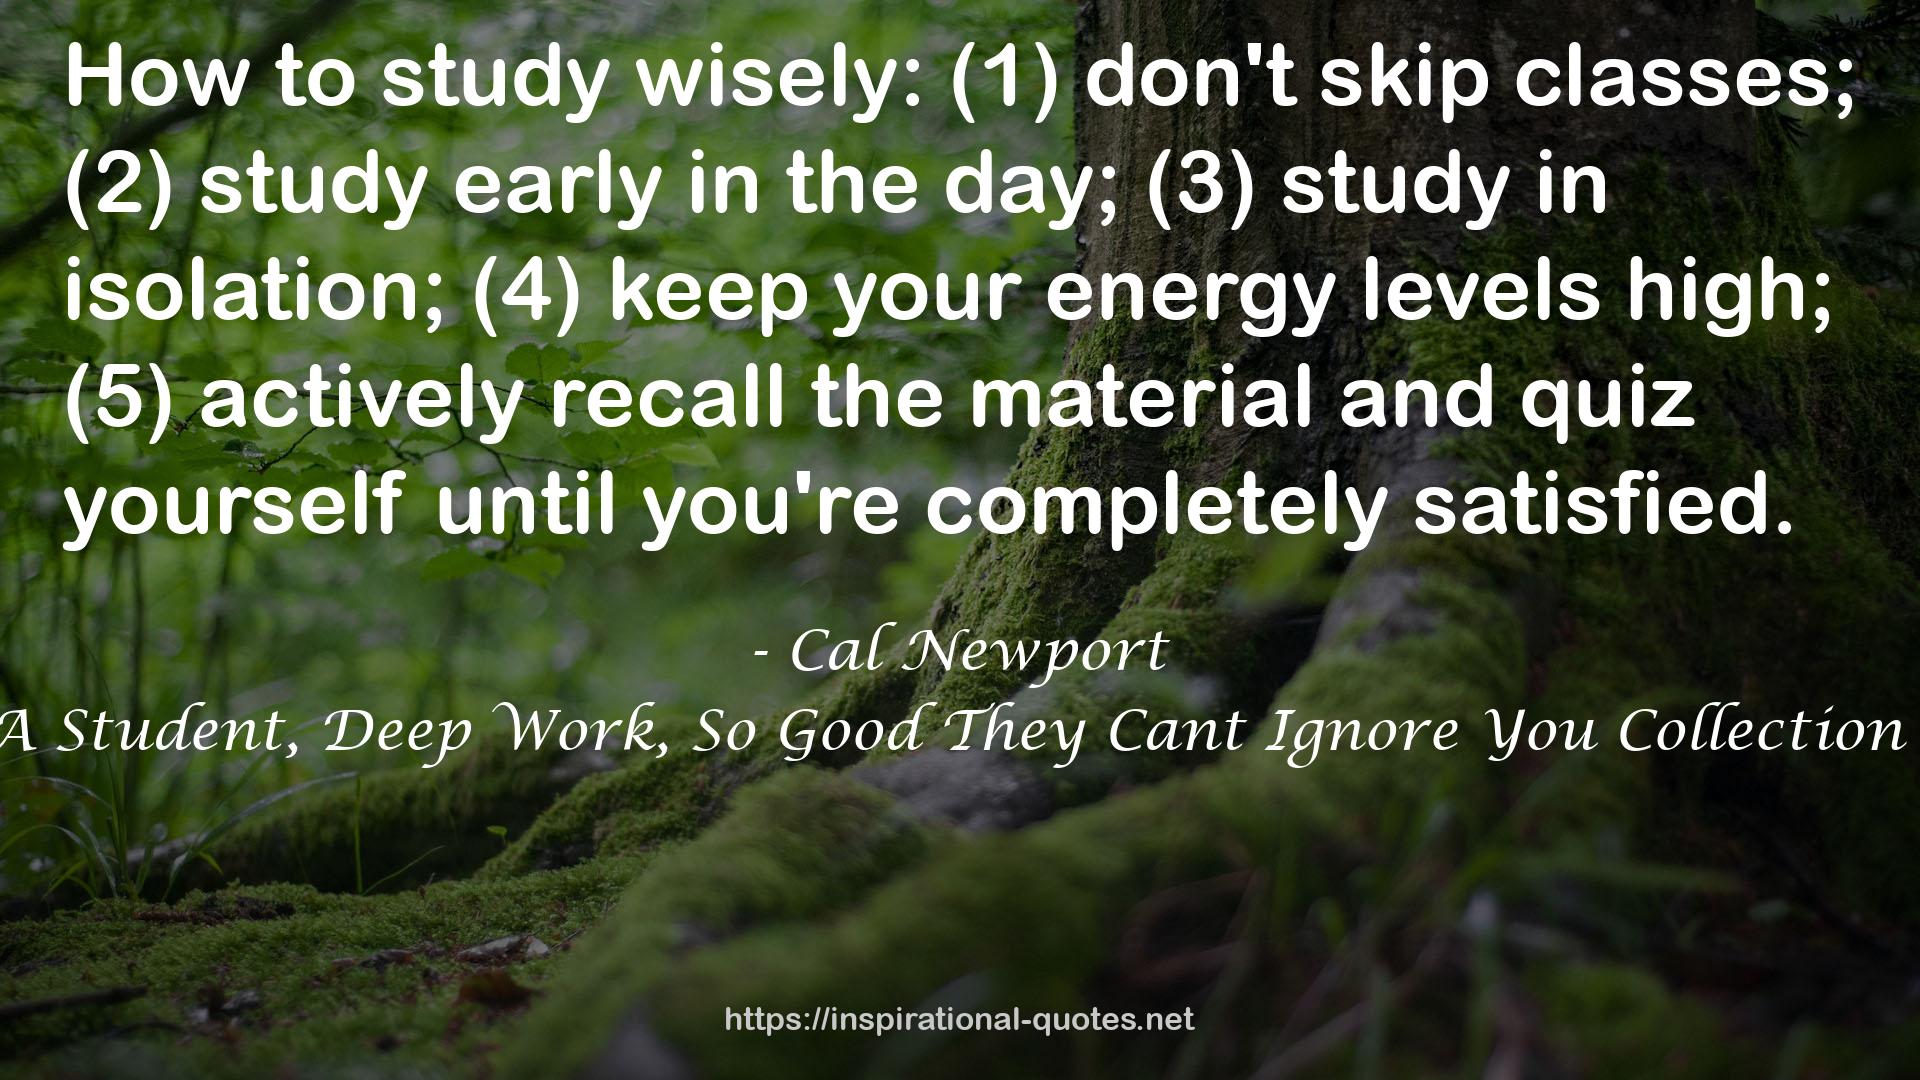 How to Become a Straight-A Student, Deep Work, So Good They Cant Ignore You Collection 3 Books Set by Cal Newport QUOTES